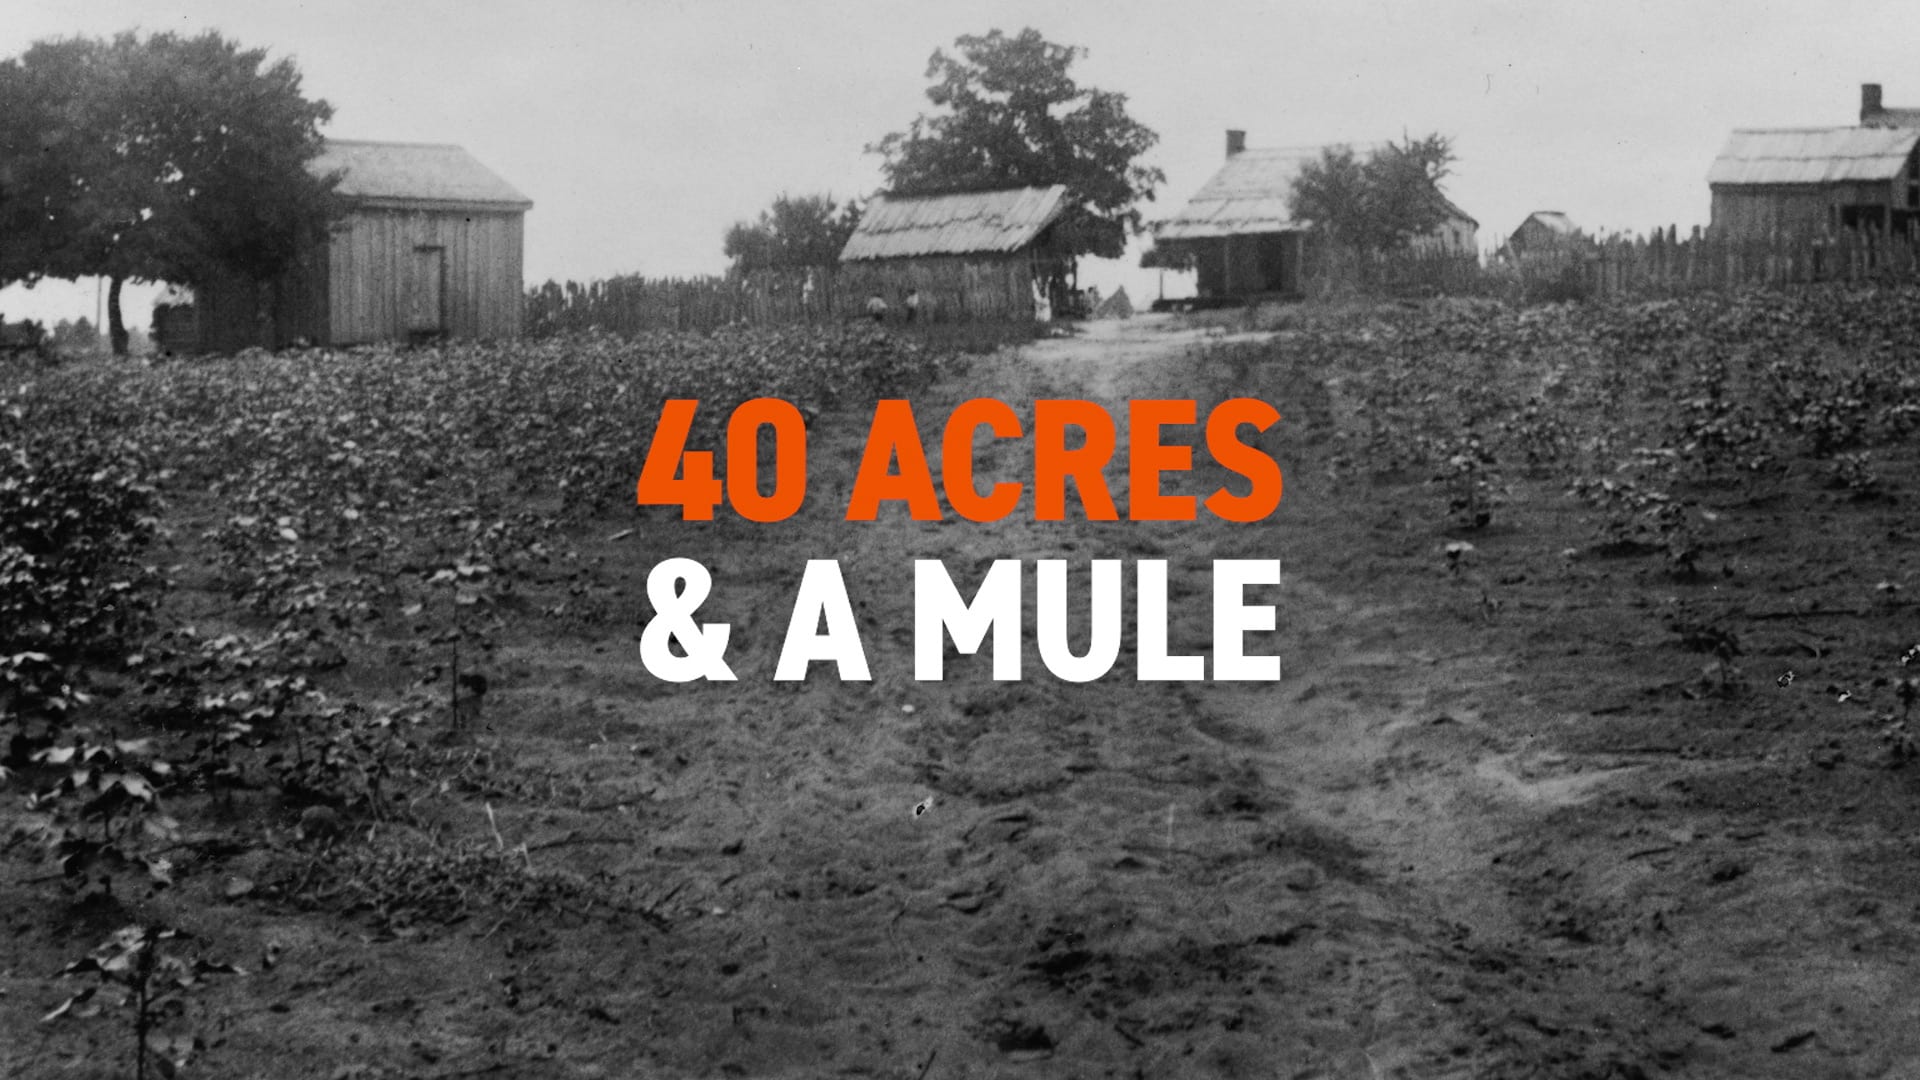 Land: Giving Rise to the Famous Phrase 40 Acres & a Mule | Black History in Two Minutes (or so)